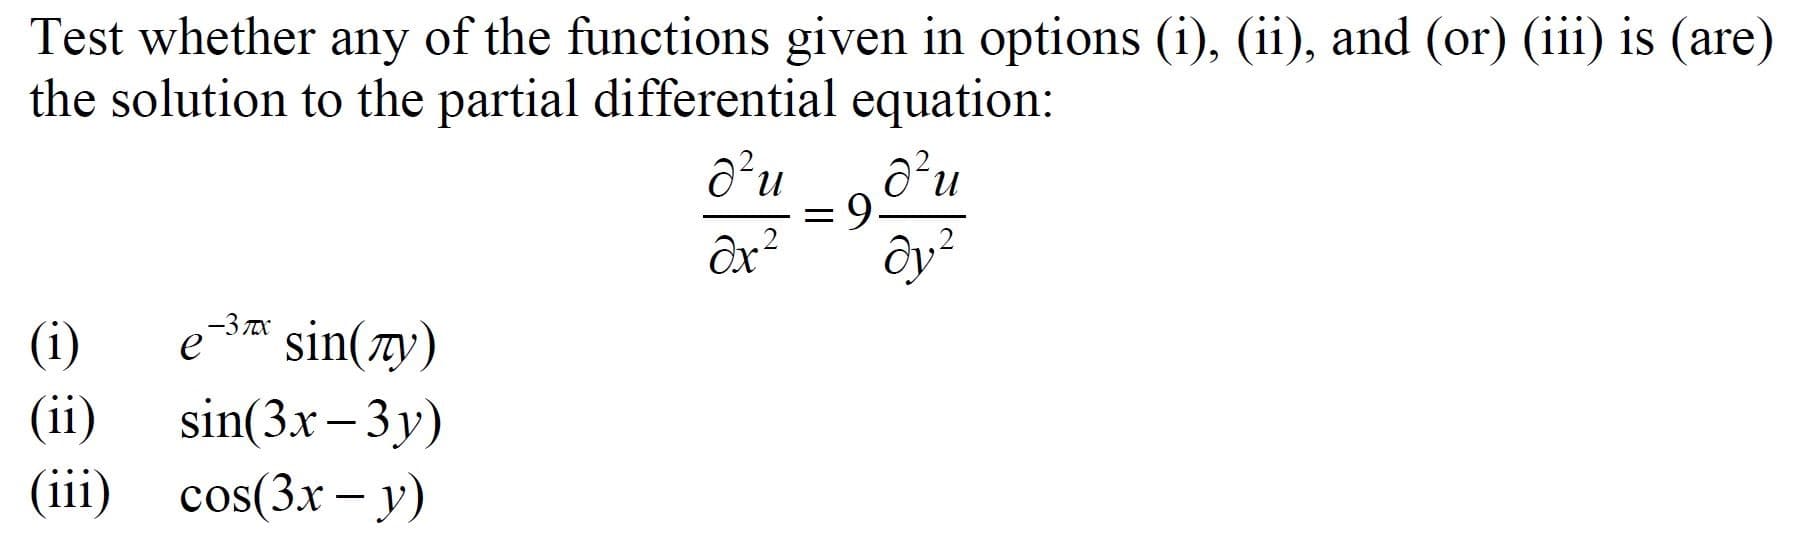 Test whether any of the functions given in options (i), (ii), and (or) (iii) is (are)
the solution to the partial differential equation:
a?u
д'и
9.
Ox?
Ôy?
-3 X
(i)
-3*
sin(zy)
(ii)
sin(3x – 3y)
(iii) cos(3.x – y)
